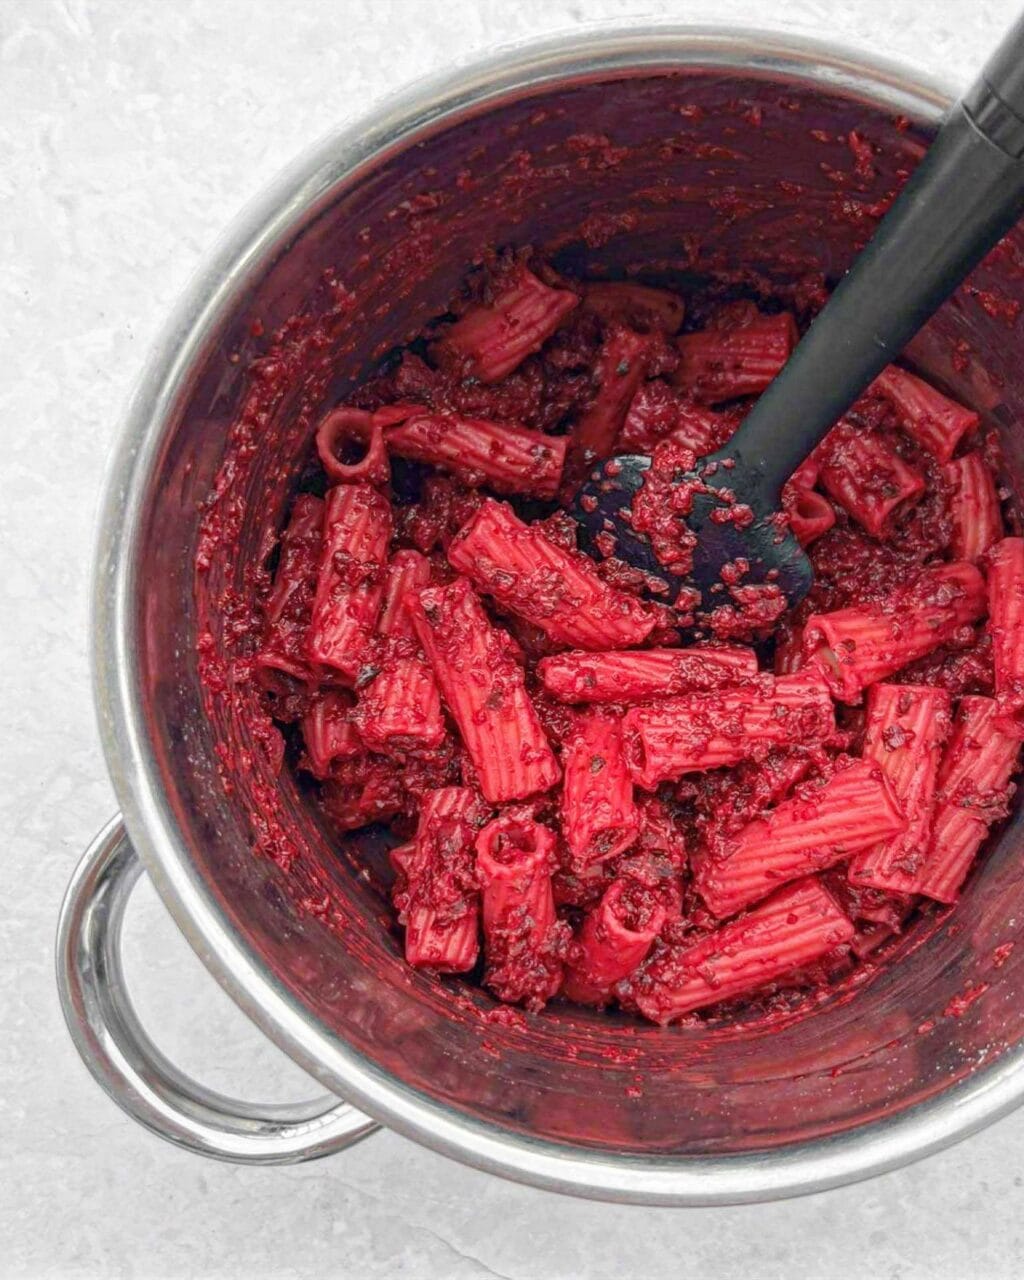 The cooked pasta tossed with the beetroot goat cheese sauce.